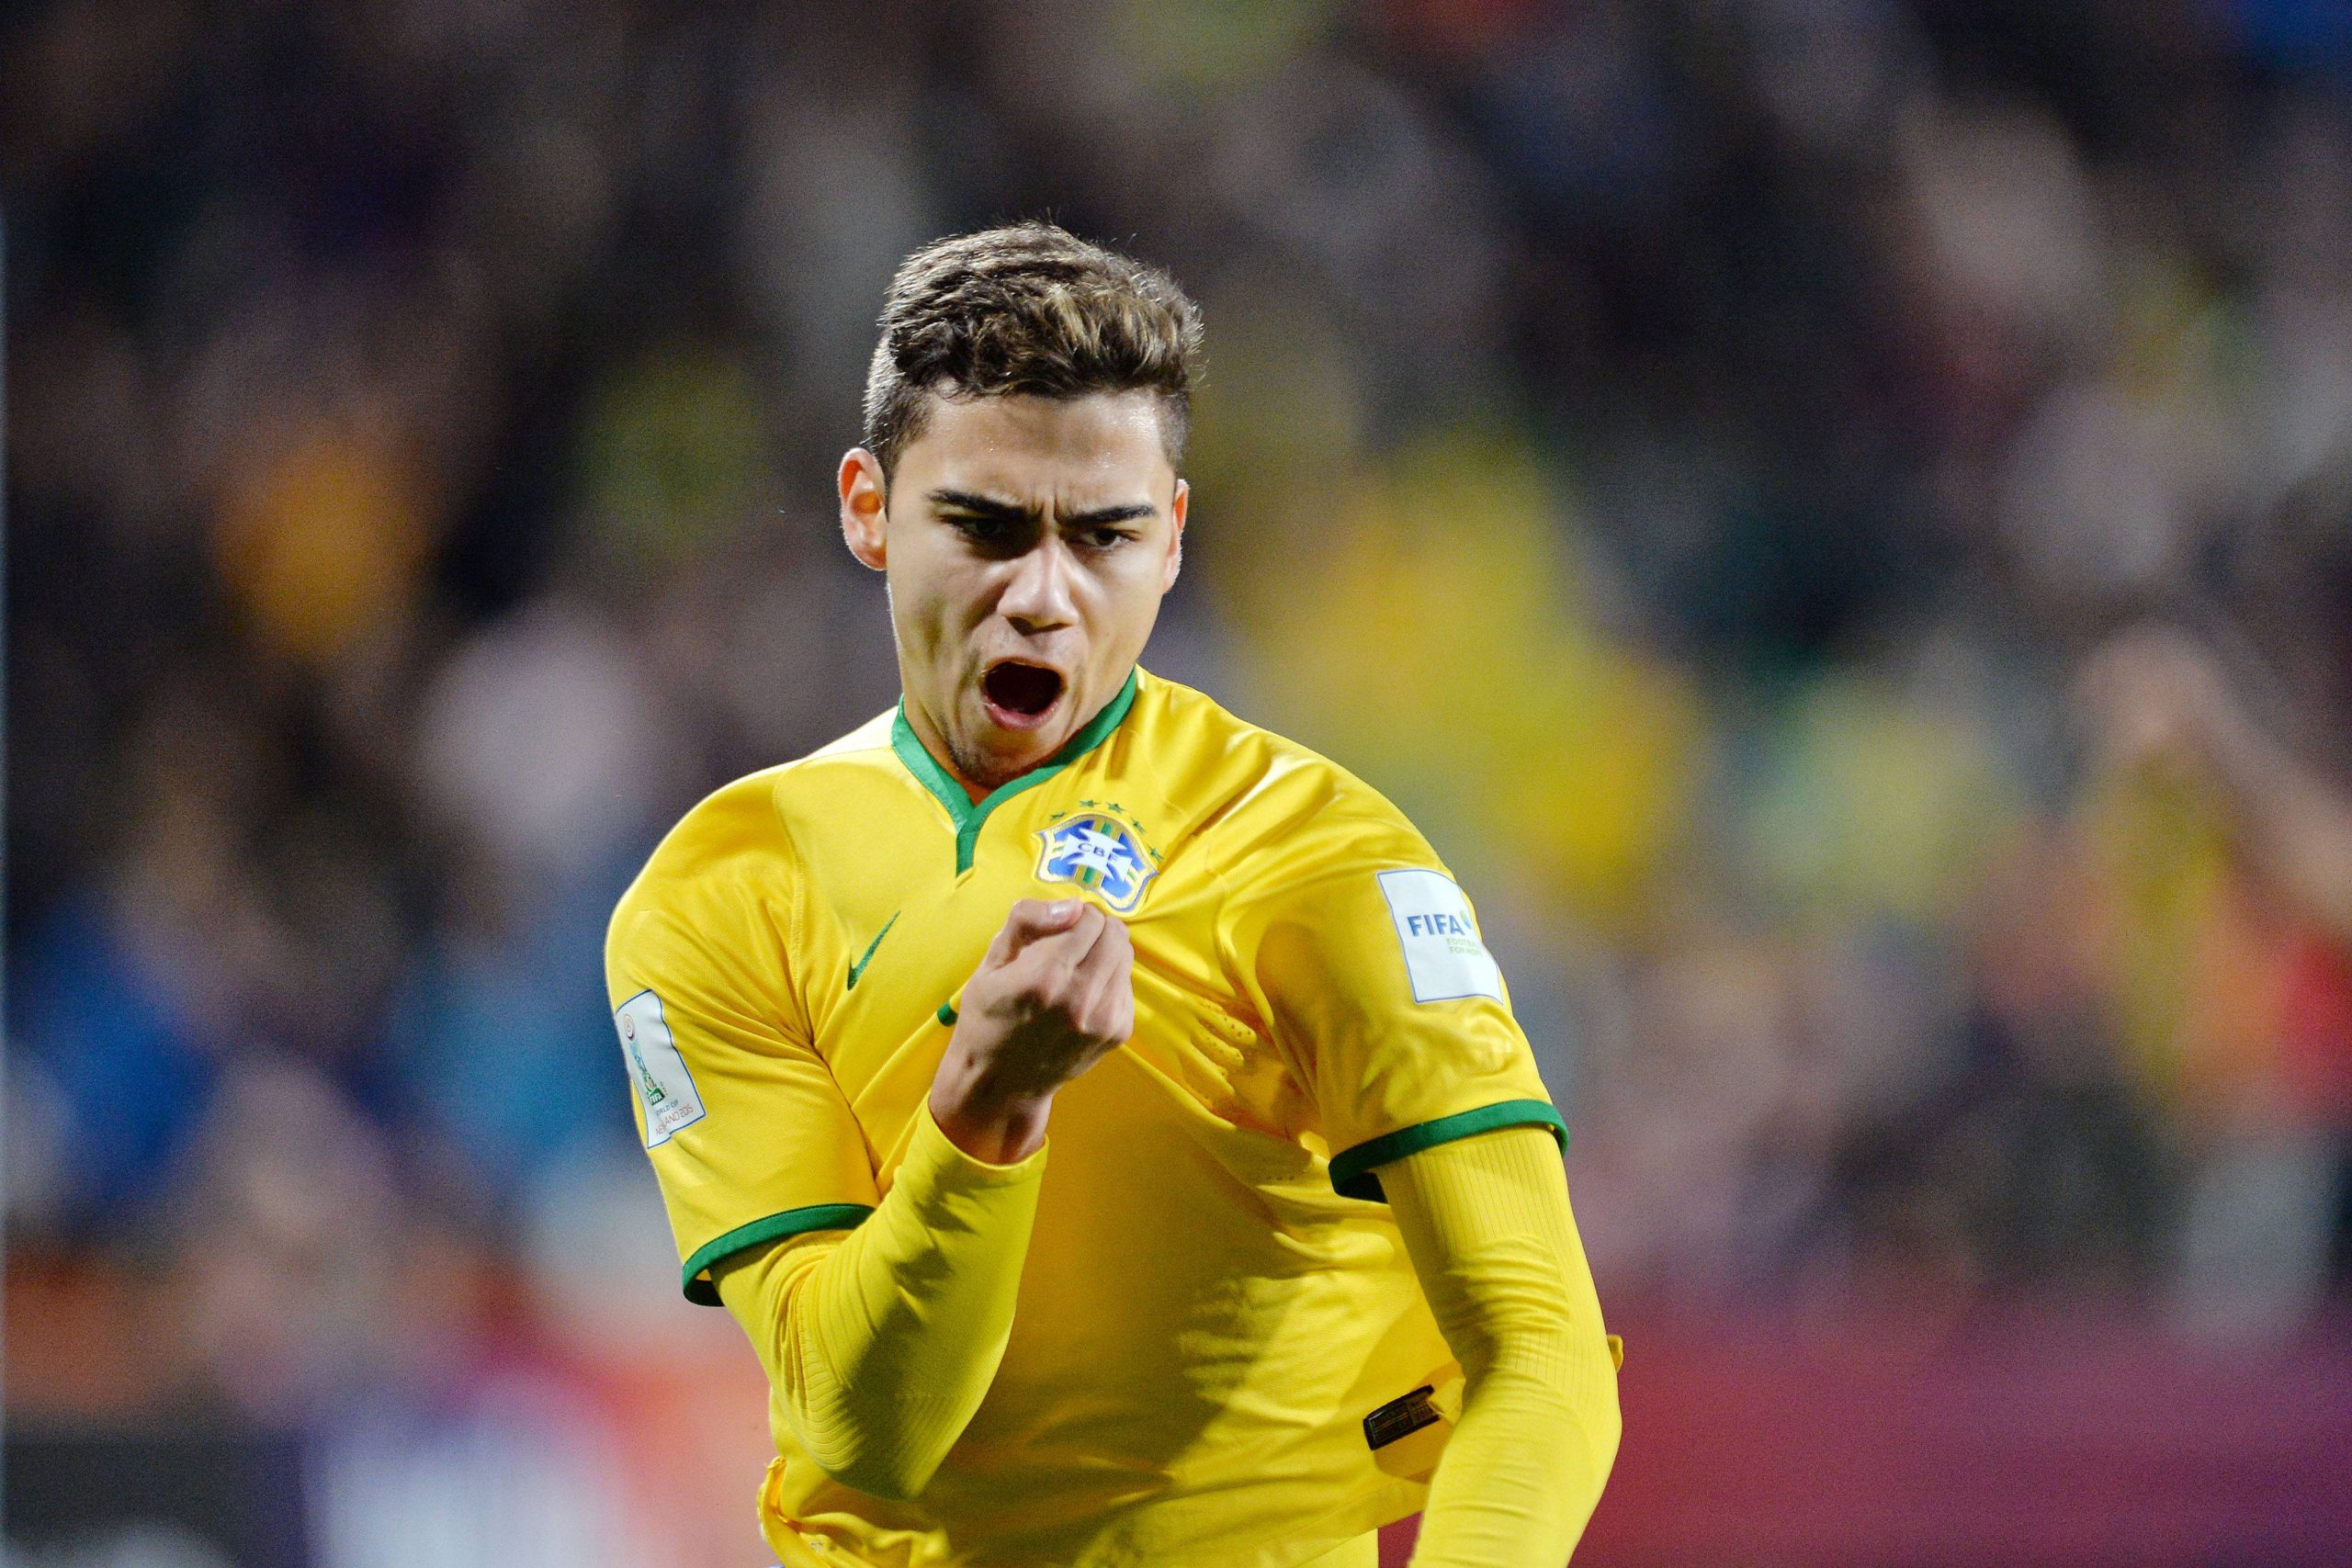 Manchester United agree £12m deal with Flamengo for Andreas Pereira.